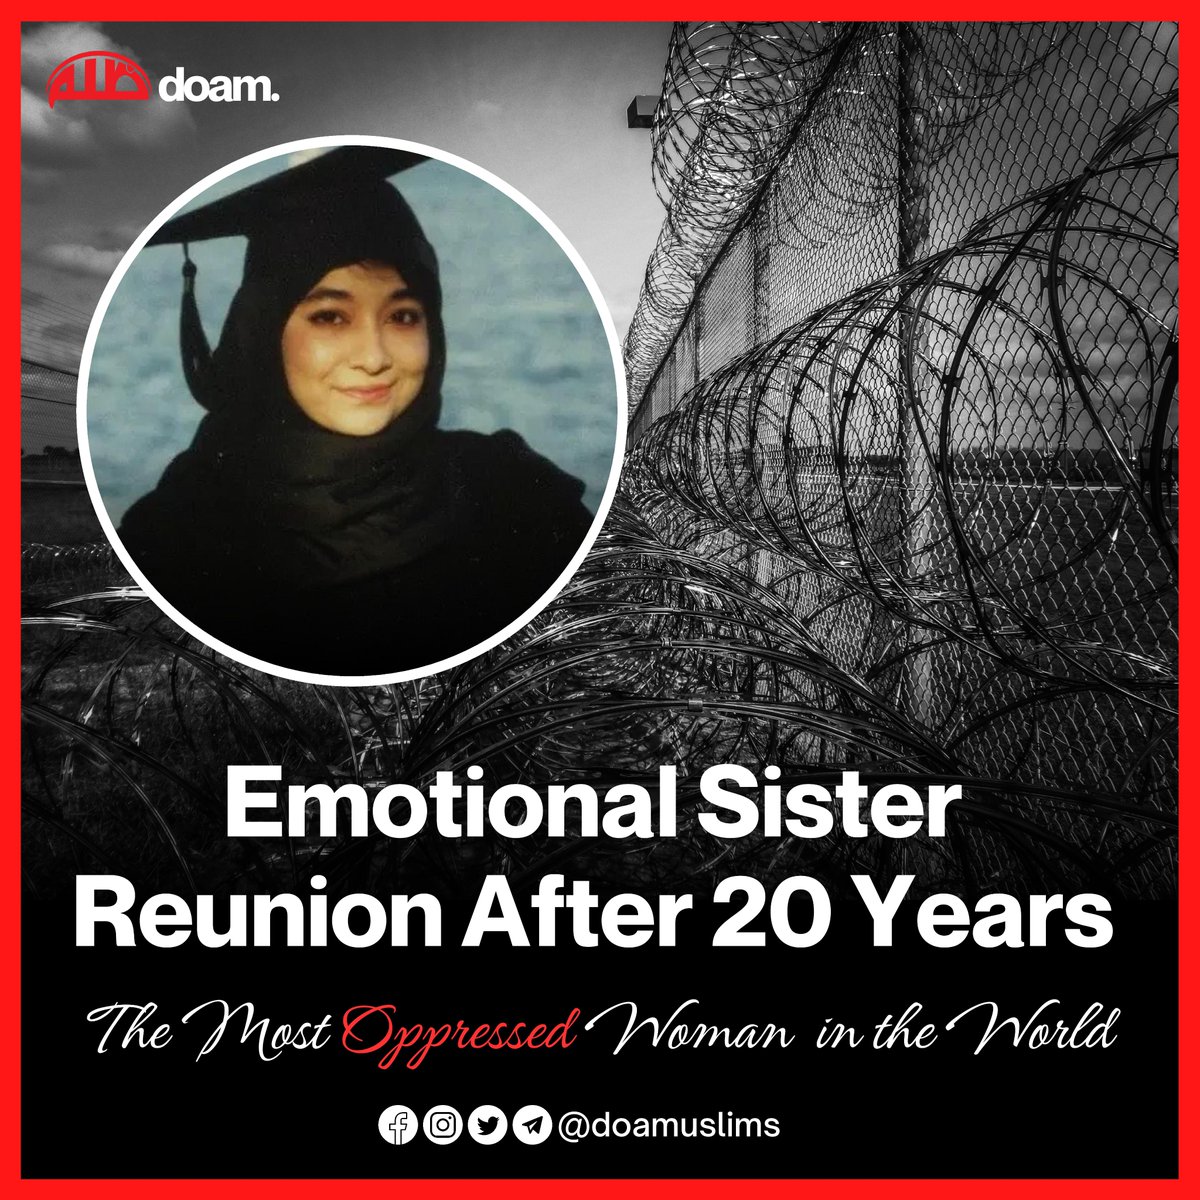 Emotional Sister-Reunion after 20 Years!

FMC Carswell
Fort Worth, Texas
16:00 Central Time, May 30, 2023

Yesterday, sisters Fowzia and Aafia Siddiqui held a reunion after 20 years. It was hardly the meeting they would have liked: the sterile visitation room at FMC Carswell was…